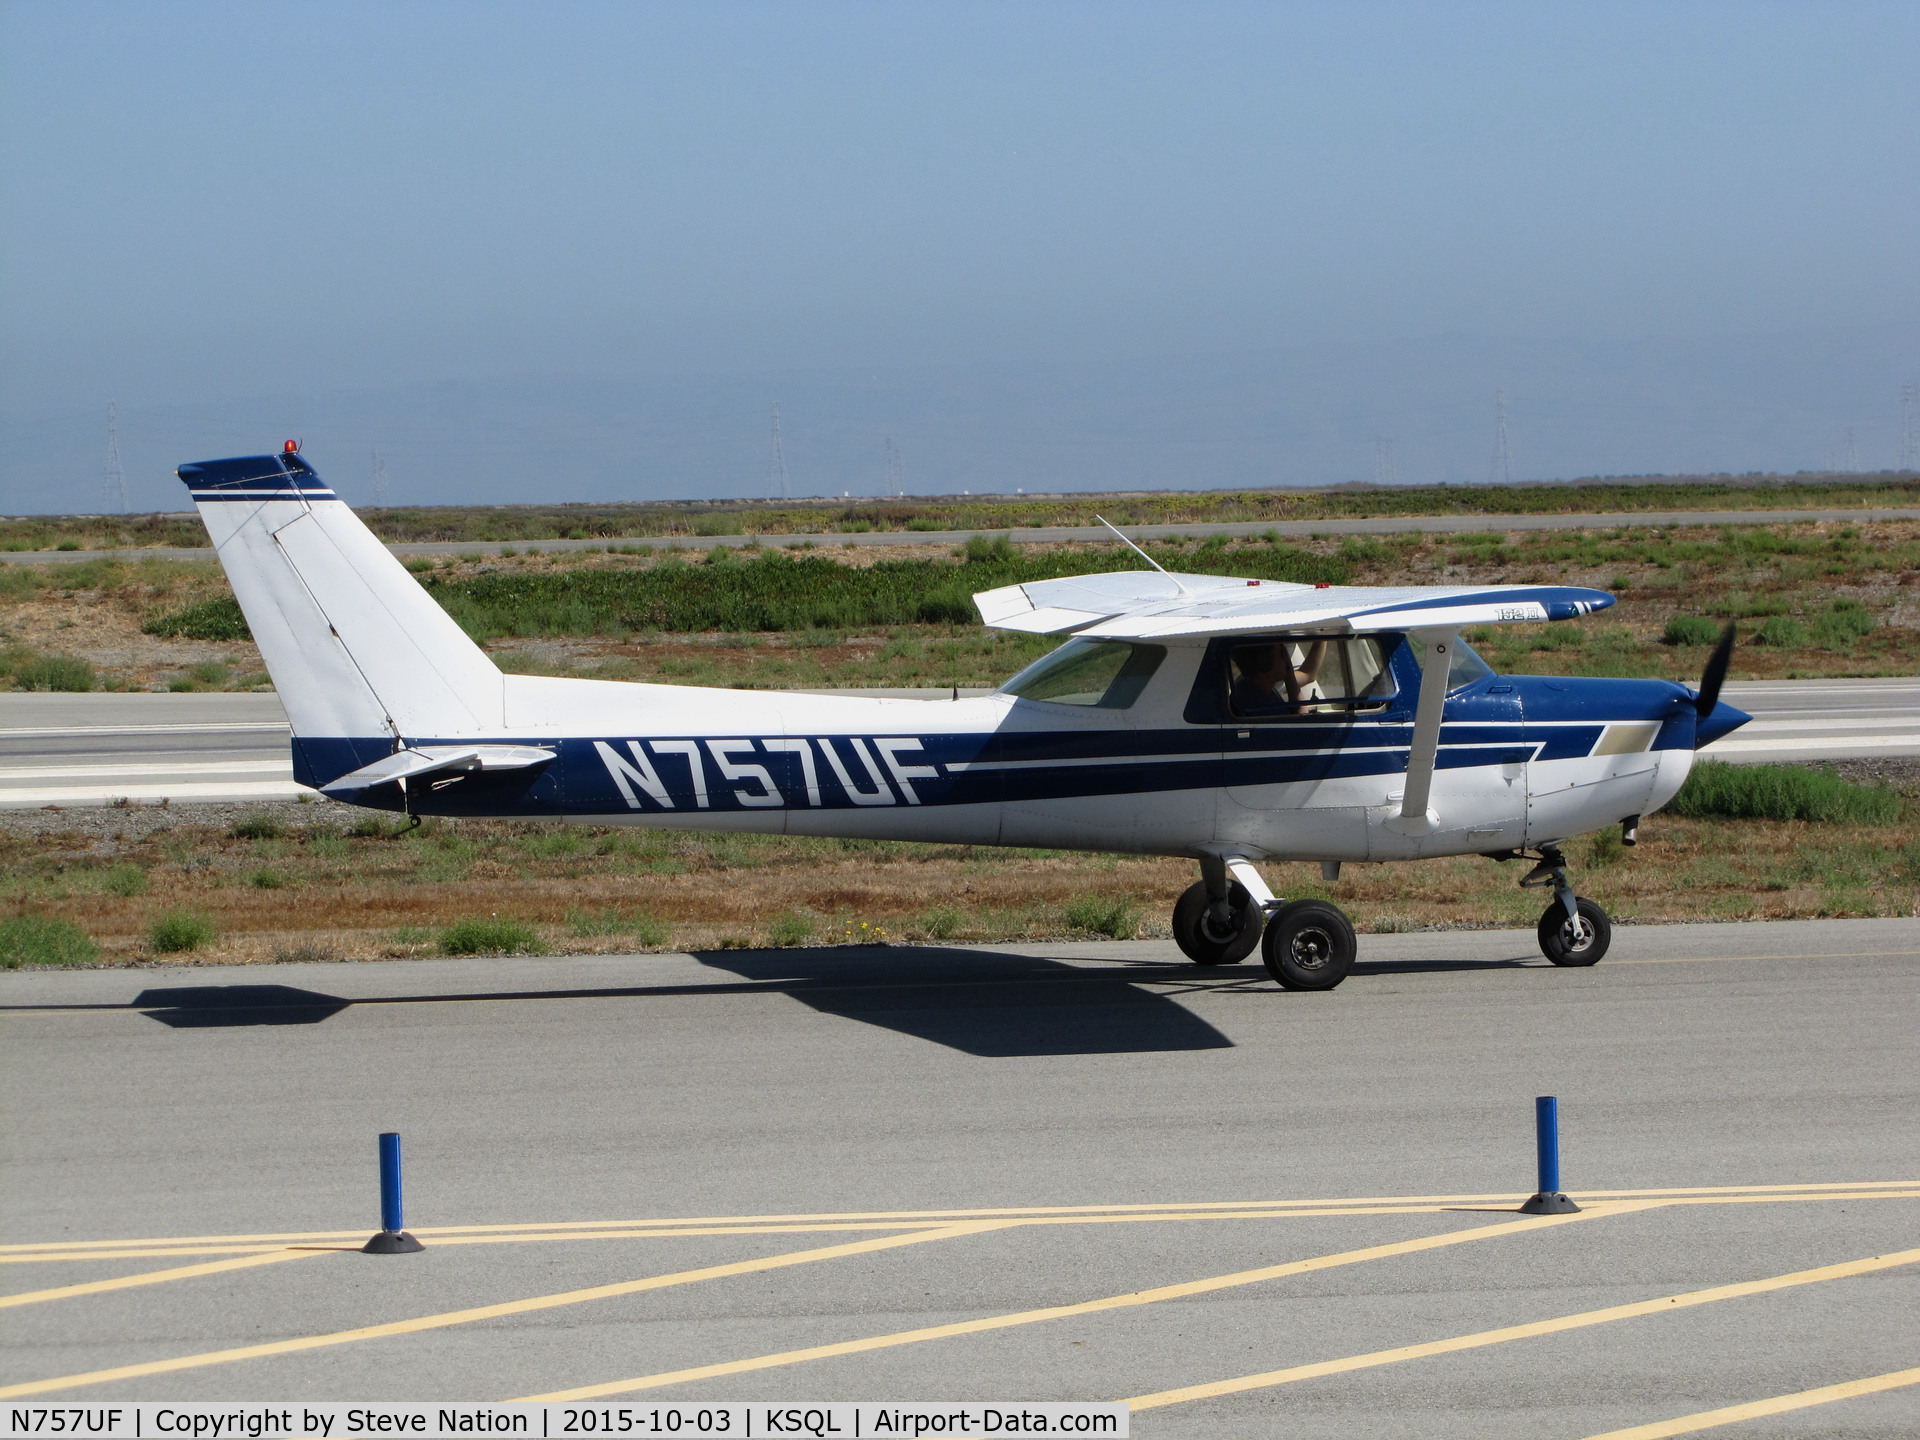 N757UF, 1977 Cessna 152 C/N 15280009, 1977 Cessna 152 taxiing for takeoff @ San Carlos Airport, CA